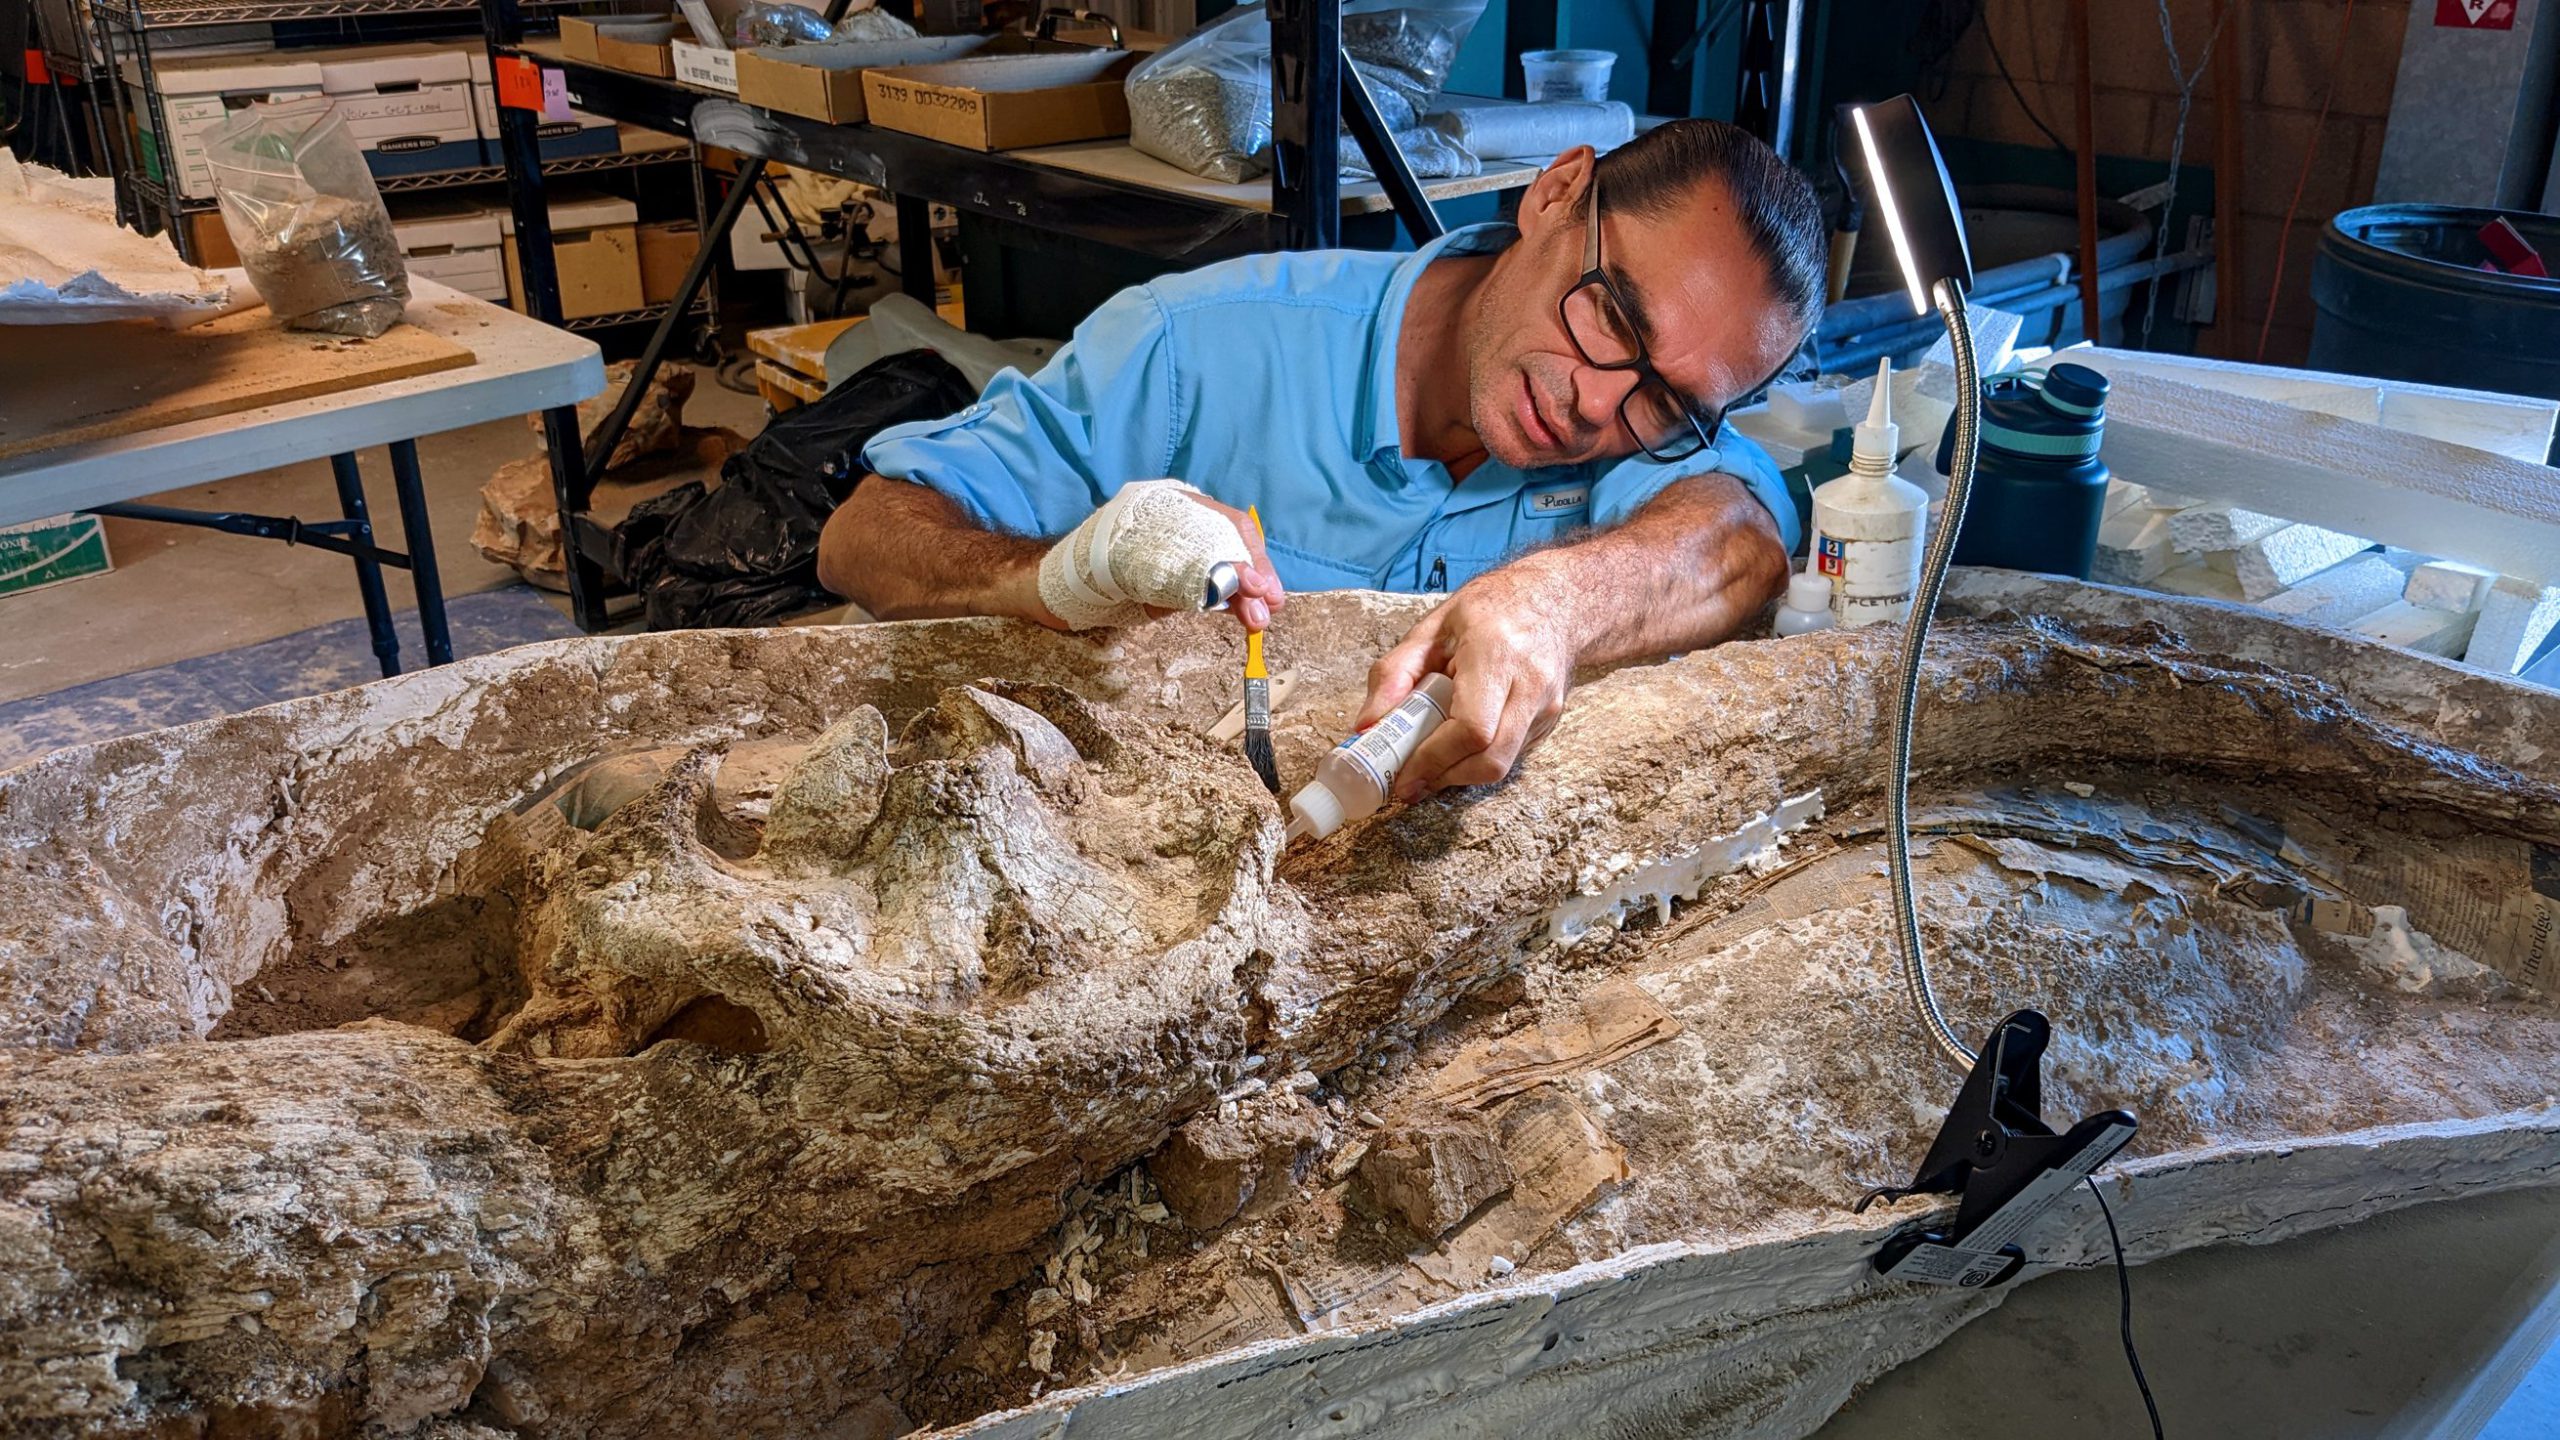 A Cogstone archeologist examines a bison fossil.